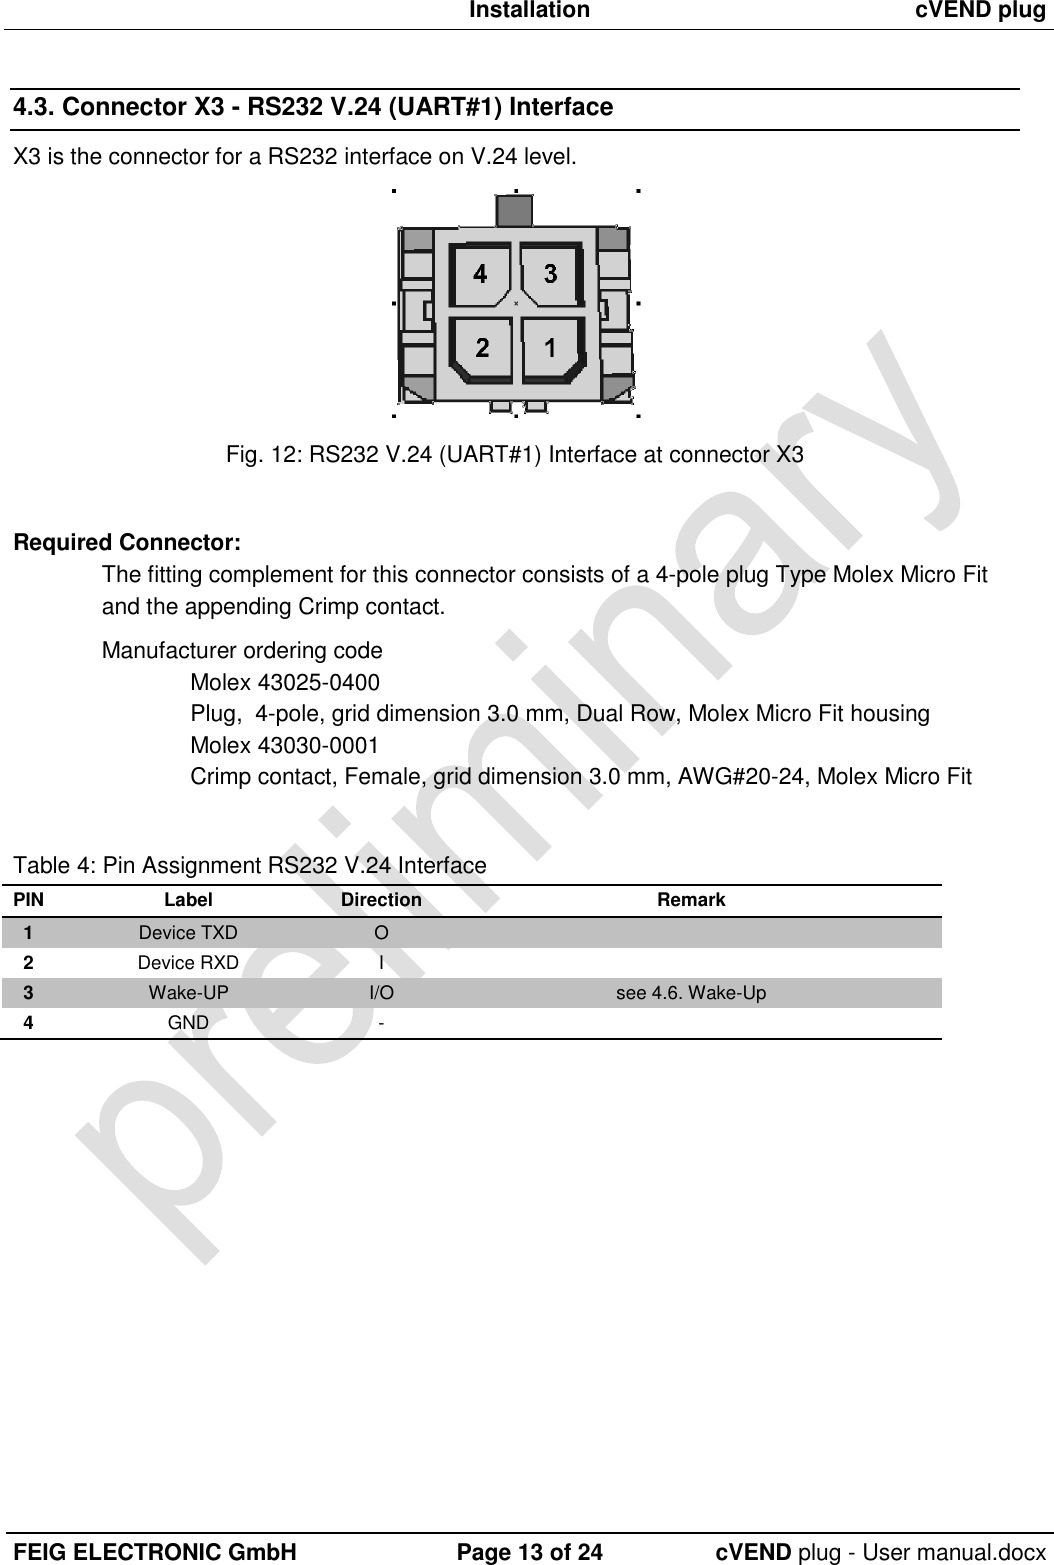  Installation cVEND plug  FEIG ELECTRONIC GmbH Page 13 of 24 cVEND plug - User manual.docx  4.3. Connector X3 - RS232 V.24 (UART#1) Interface X3 is the connector for a RS232 interface on V.24 level.  Fig. 12: RS232 V.24 (UART#1) Interface at connector X3  Required Connector: The fitting complement for this connector consists of a 4-pole plug Type Molex Micro Fit and the appending Crimp contact.  Manufacturer ordering code Molex 43025-0400 Plug,  4-pole, grid dimension 3.0 mm, Dual Row, Molex Micro Fit housing Molex 43030-0001 Crimp contact, Female, grid dimension 3.0 mm, AWG#20-24, Molex Micro Fit  Table 4: Pin Assignment RS232 V.24 Interface PIN Label Direction Remark 1 Device TXD O  2 Device RXD I  3 Wake-UP I/O see 4.6. Wake-Up 4 GND -    